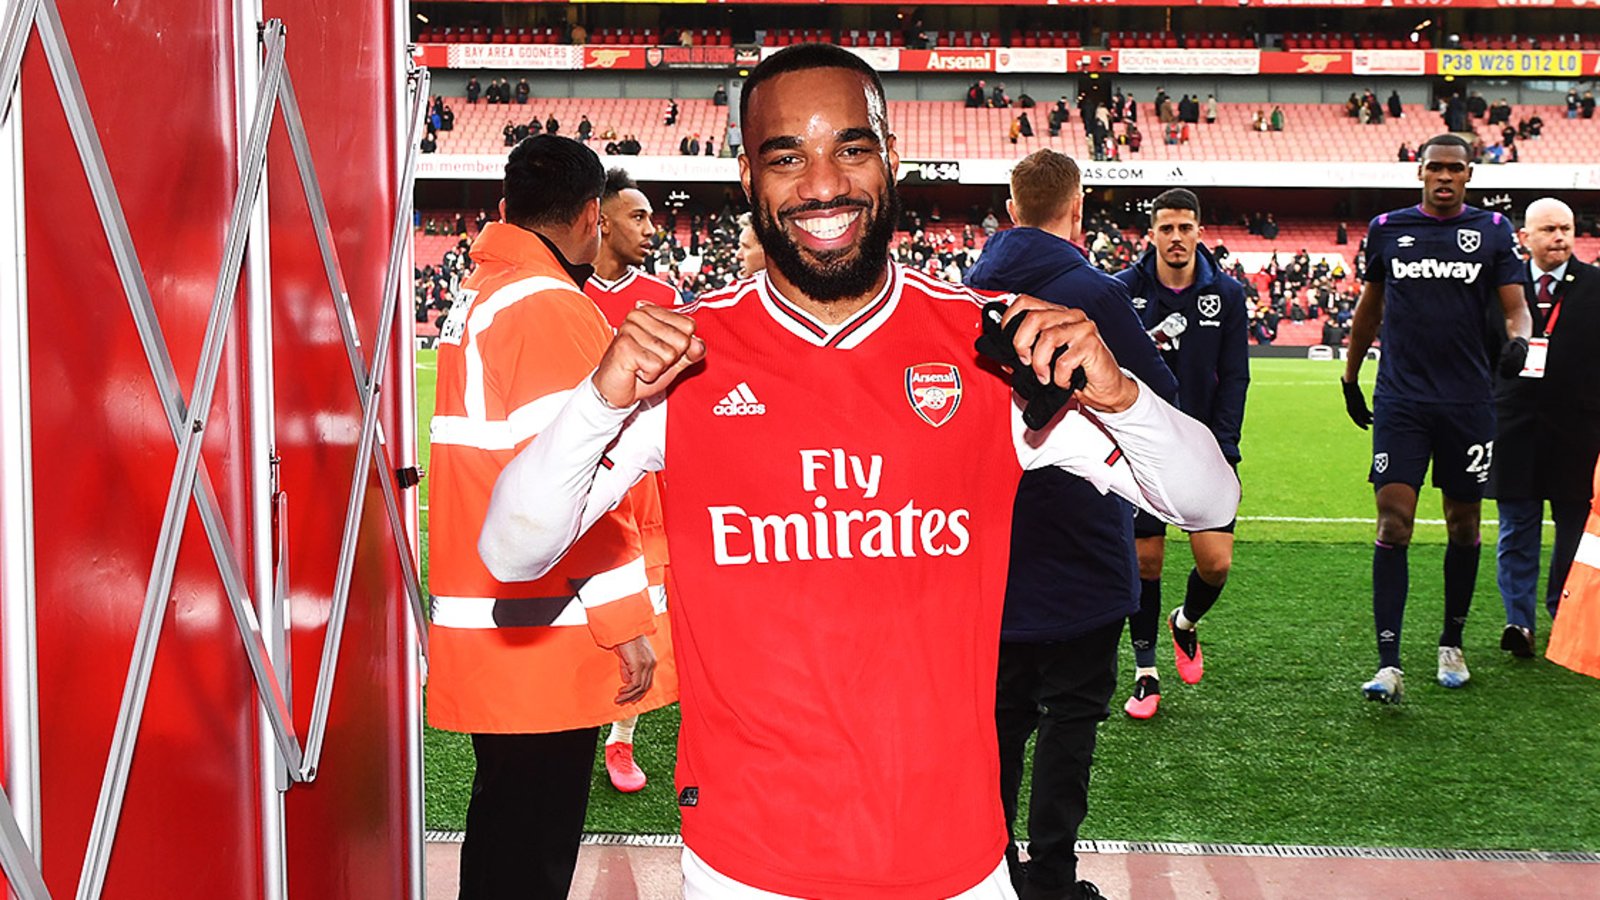 What next for Arsenal's Lacazette? he'll be 31 years old in May and his contract expires in the summer of 2022